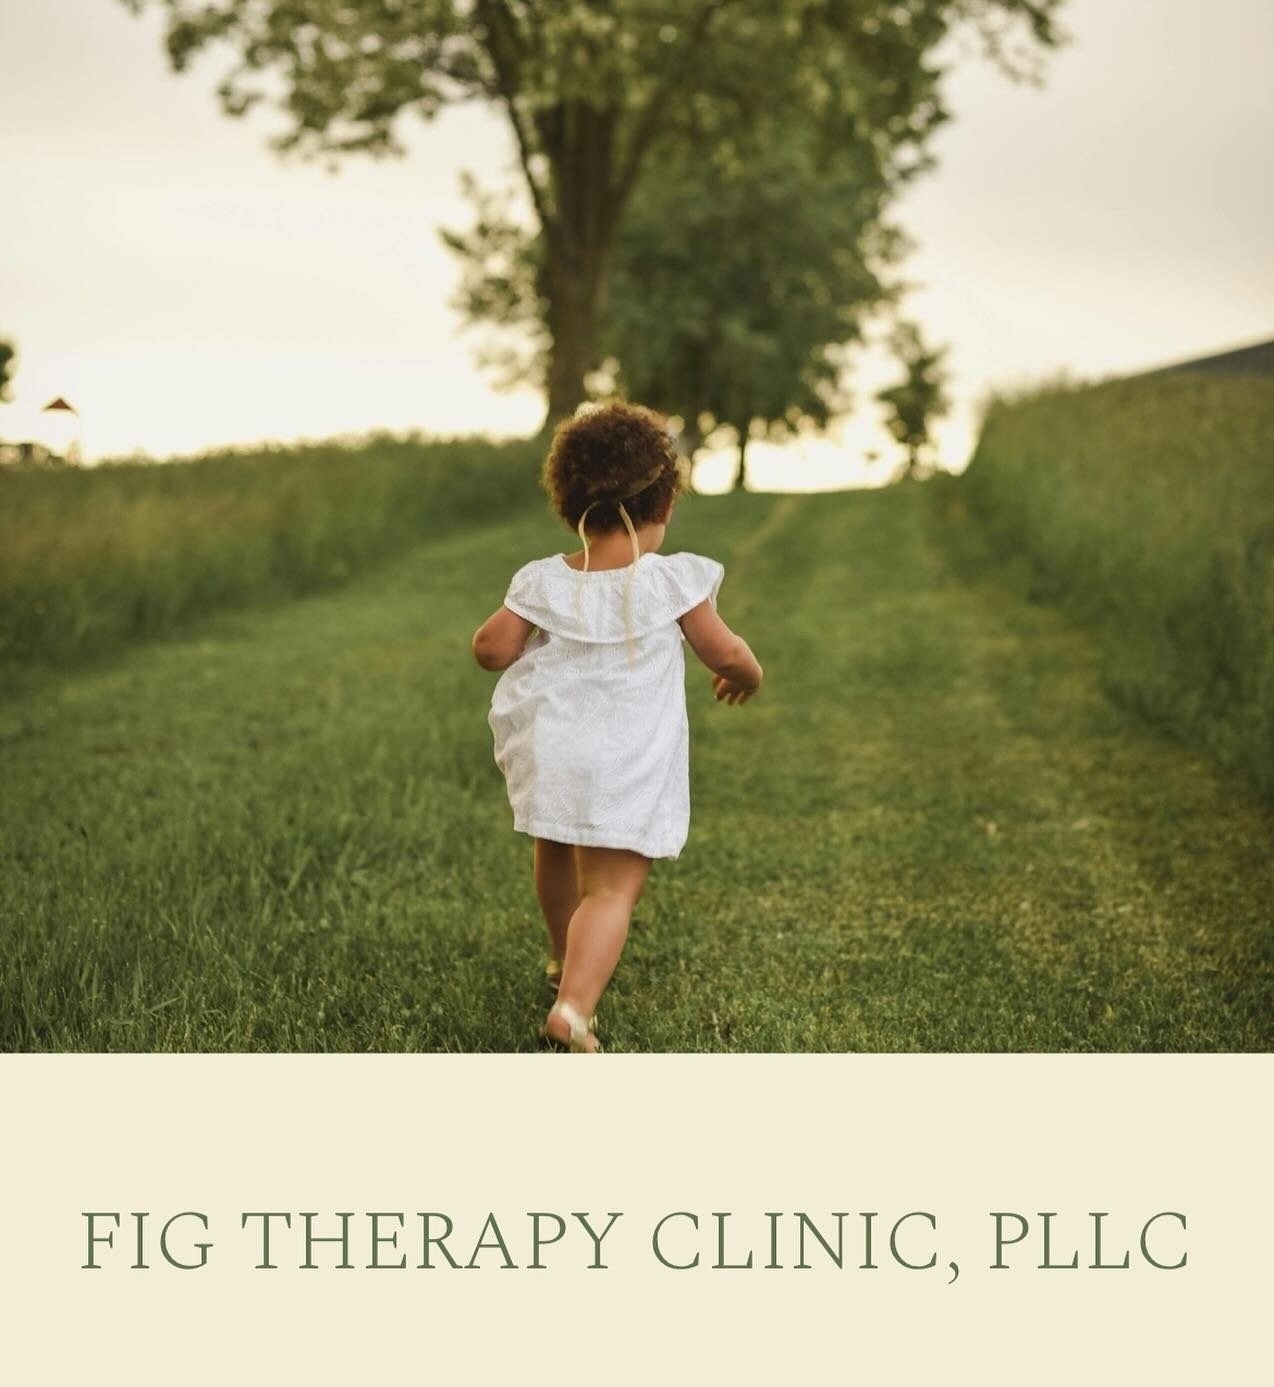 New website is live!! Link in bio 🌱

https://www.figtherapyclinic.com